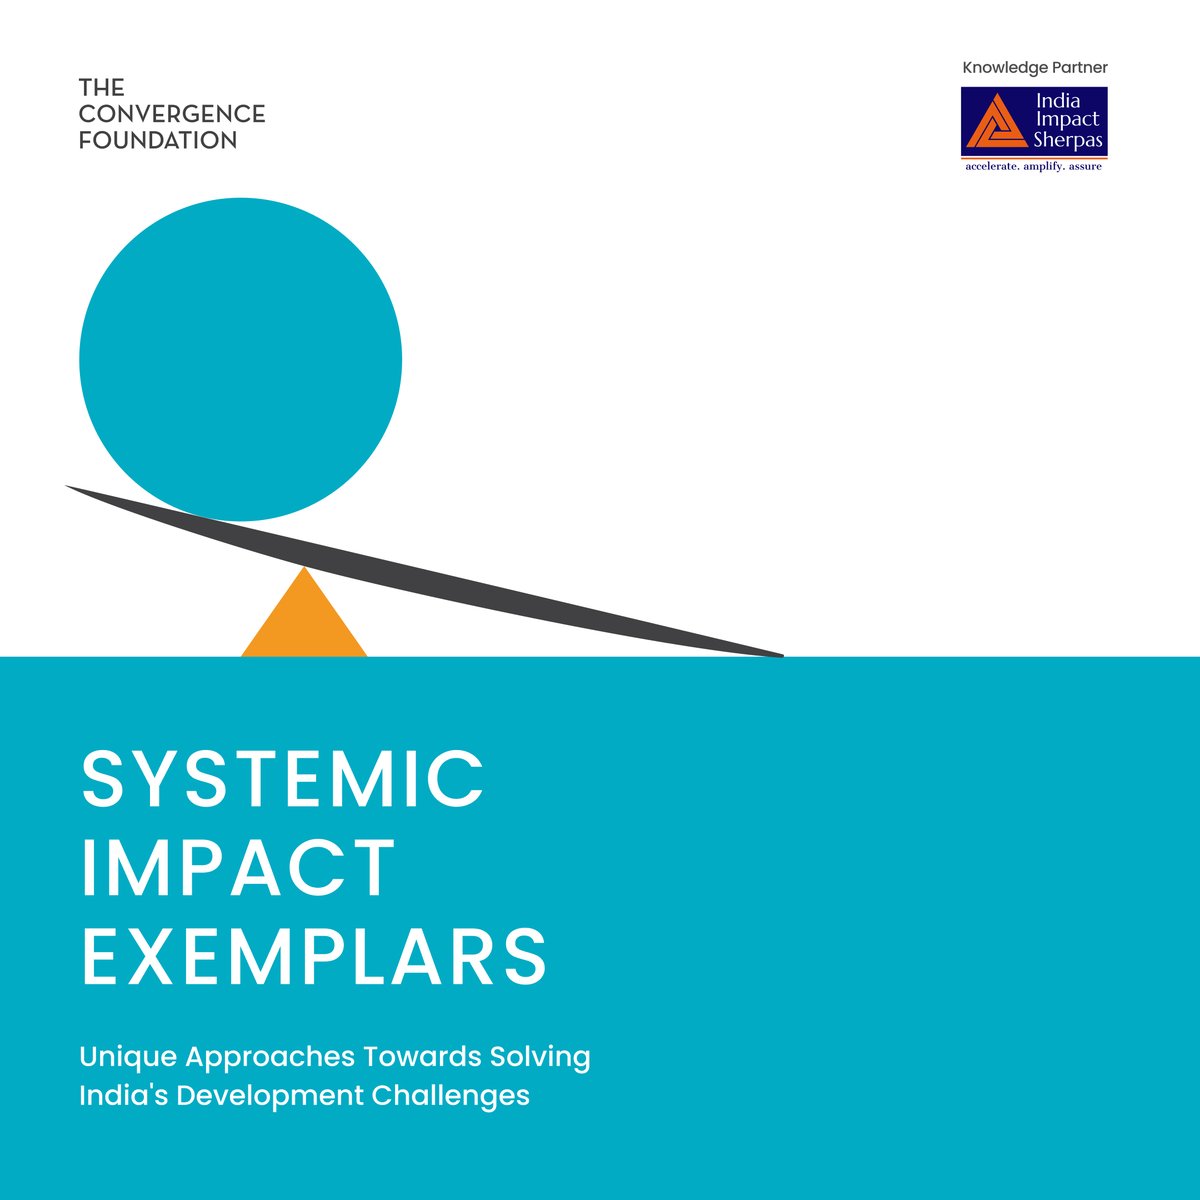 At Pratham, we adopted the systems change approach to improve learning outcomes of India’s school-going children. This report published by @TCFtweet is an attempt to understand what systems change entails: theconvergencefoundation.org/systemicimpact/